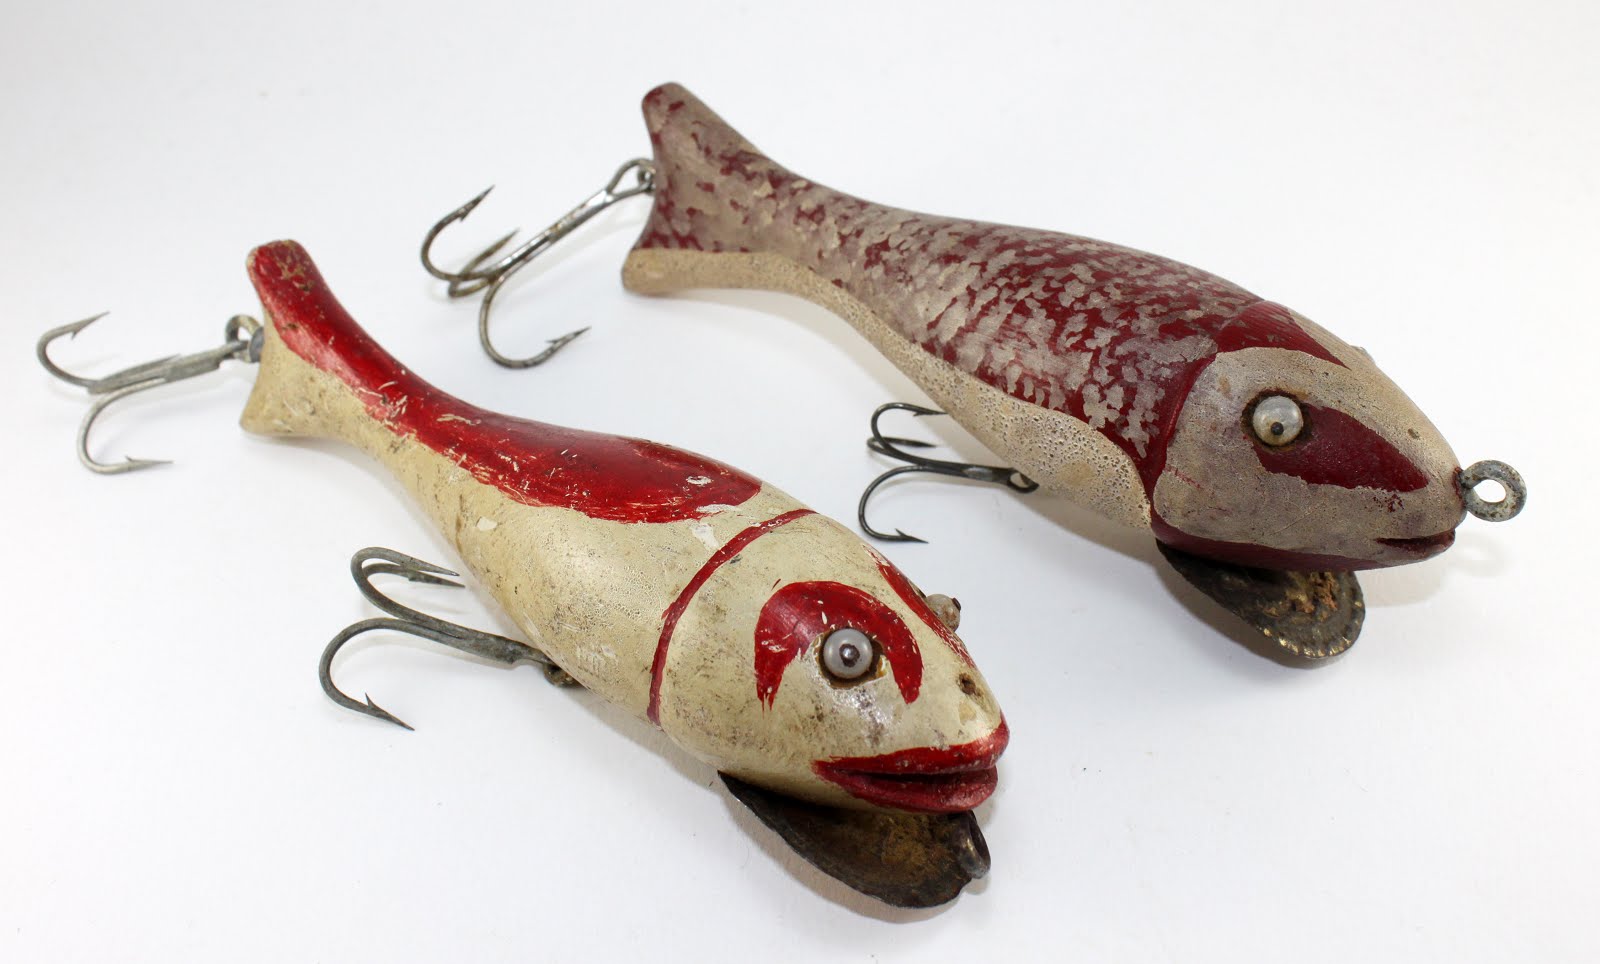 Chance's Folk Art Fishing Lure Research Blog: Intriguing Red and White musky  Minnows